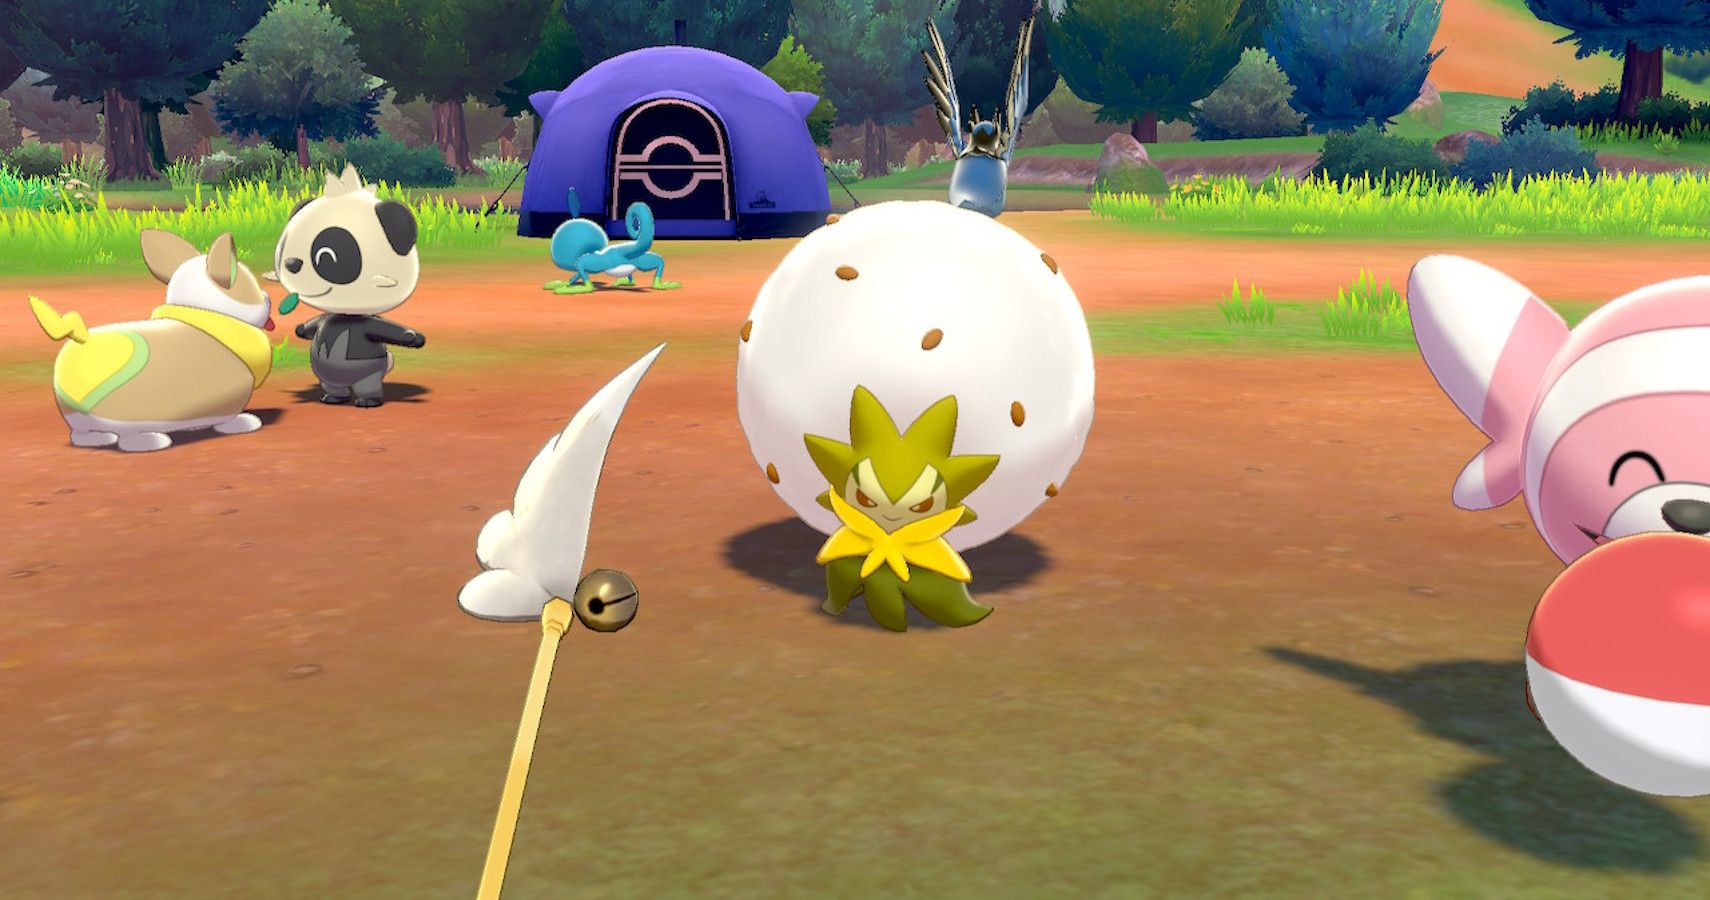 Pokémon Sword and Shield: How To Make The Most Of Camping With Pokémon